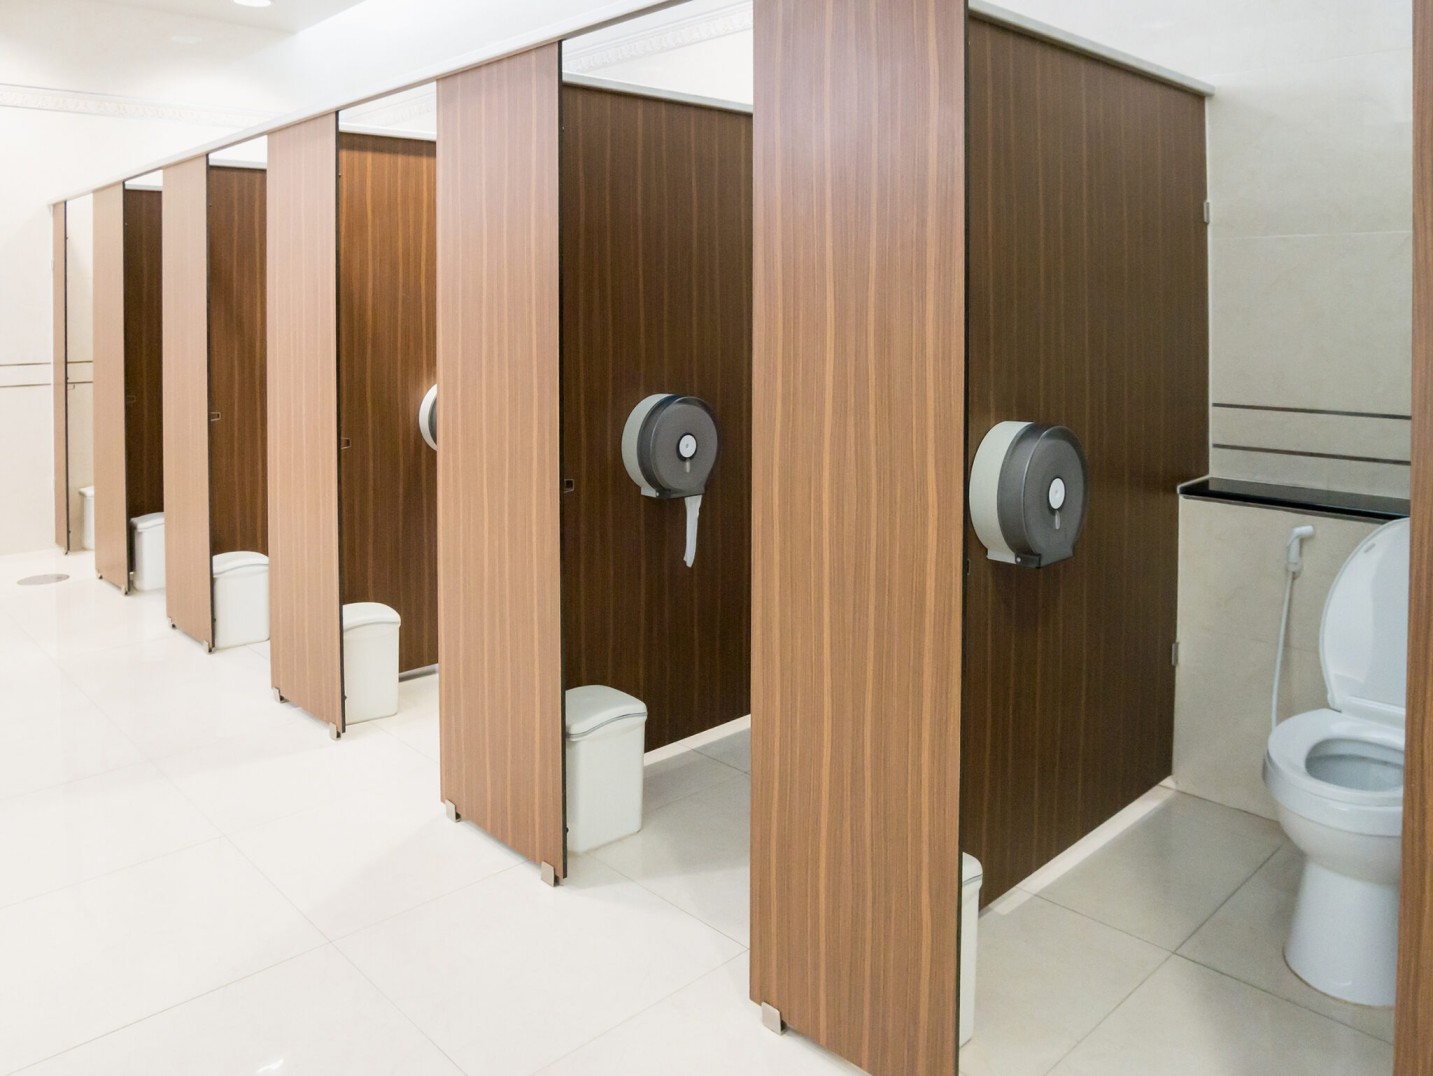 How big should a toilet cubicle be? - M&P Fittings